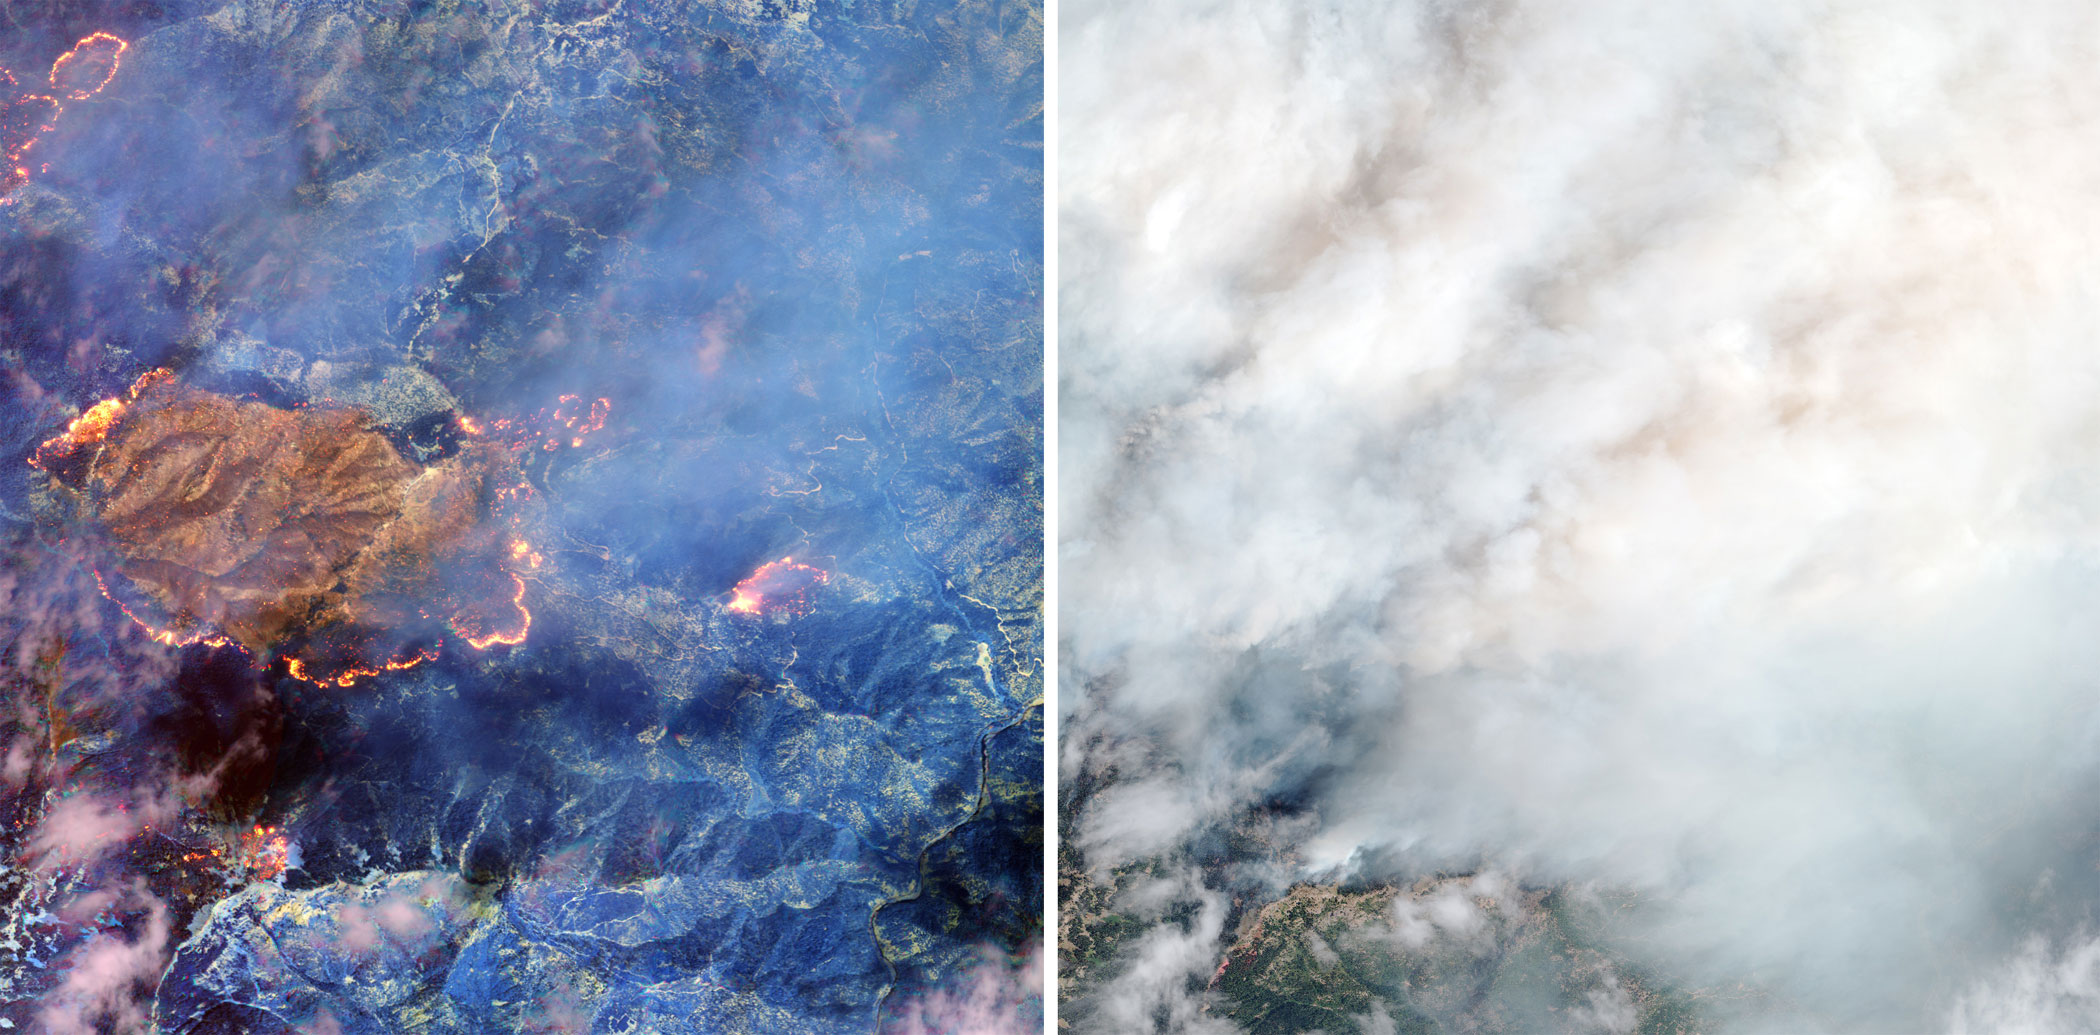 A forest fire at the Happy Camp complex in California’s Klamath National Forest imaged with (left) and without (right) SWIR, in Aug. 2014.